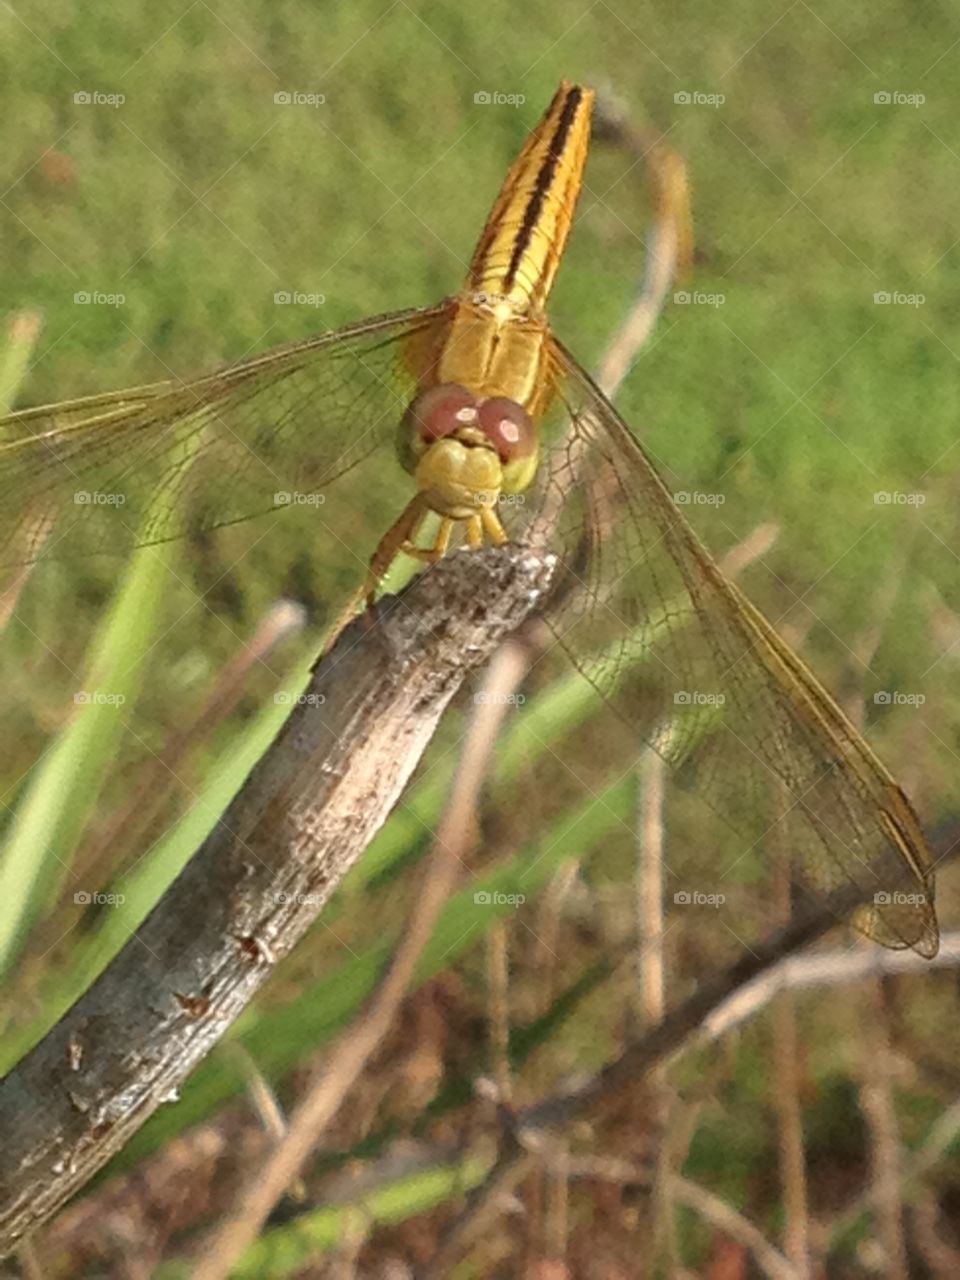 Dragonfly silly face 